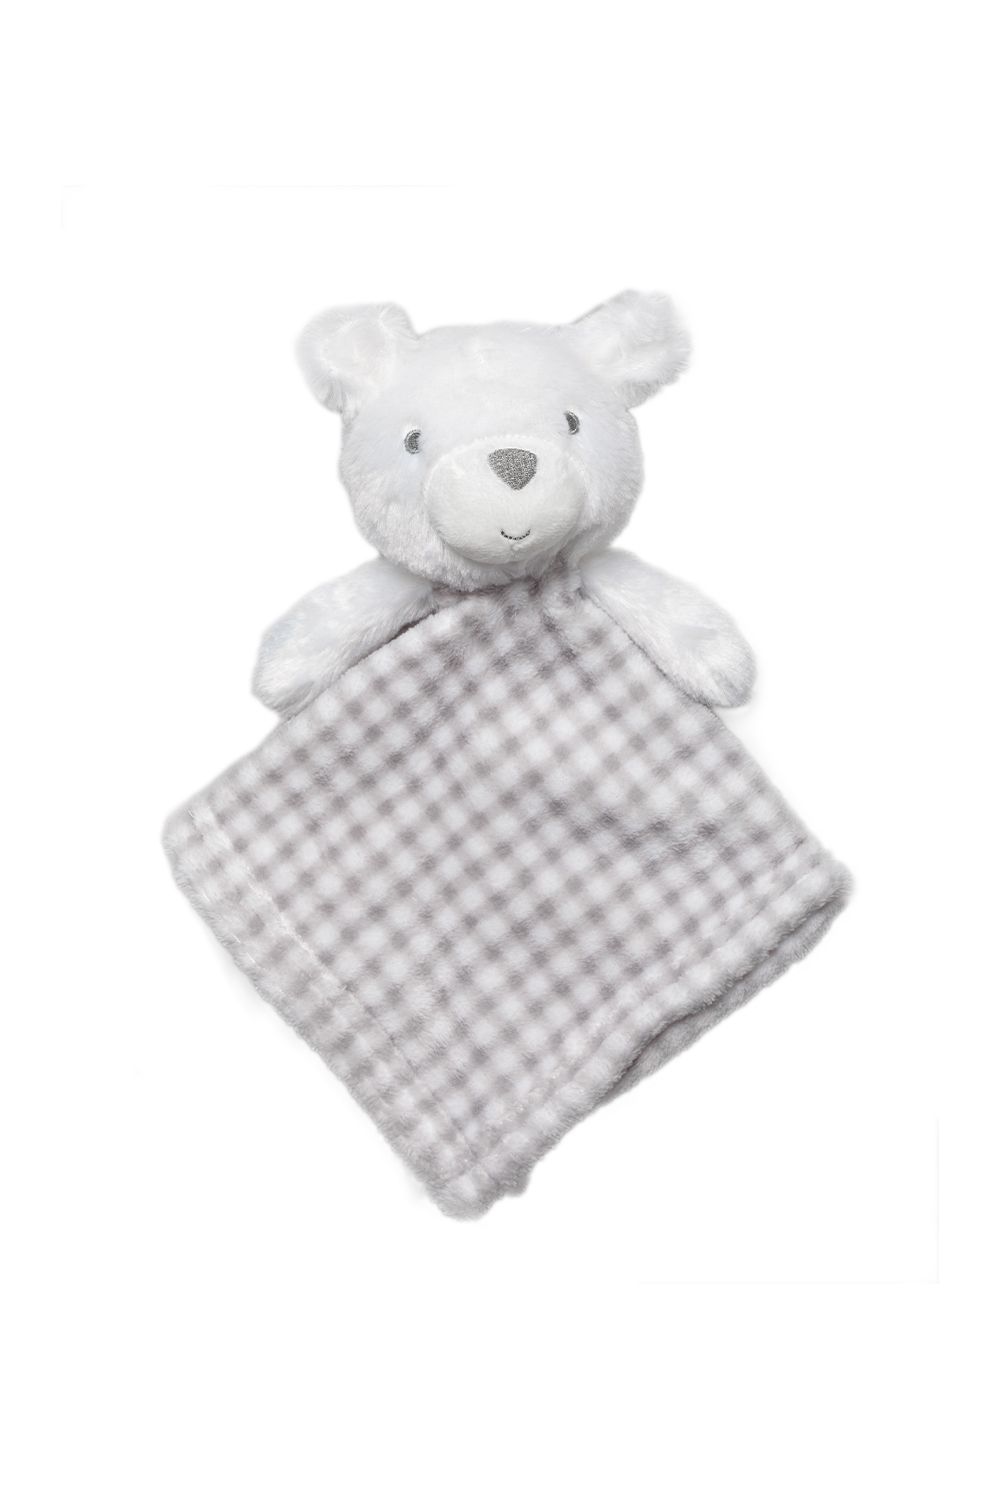 This adorable Snuggle Tots comforter and blanket set make the perfect gift for the little one in your life. The two-piece set features a beautiful, fluffy blanket with gingham print all over, and a comforter with the same print with a cuddly bear toy attached. This set makes a lovely baby shower present.